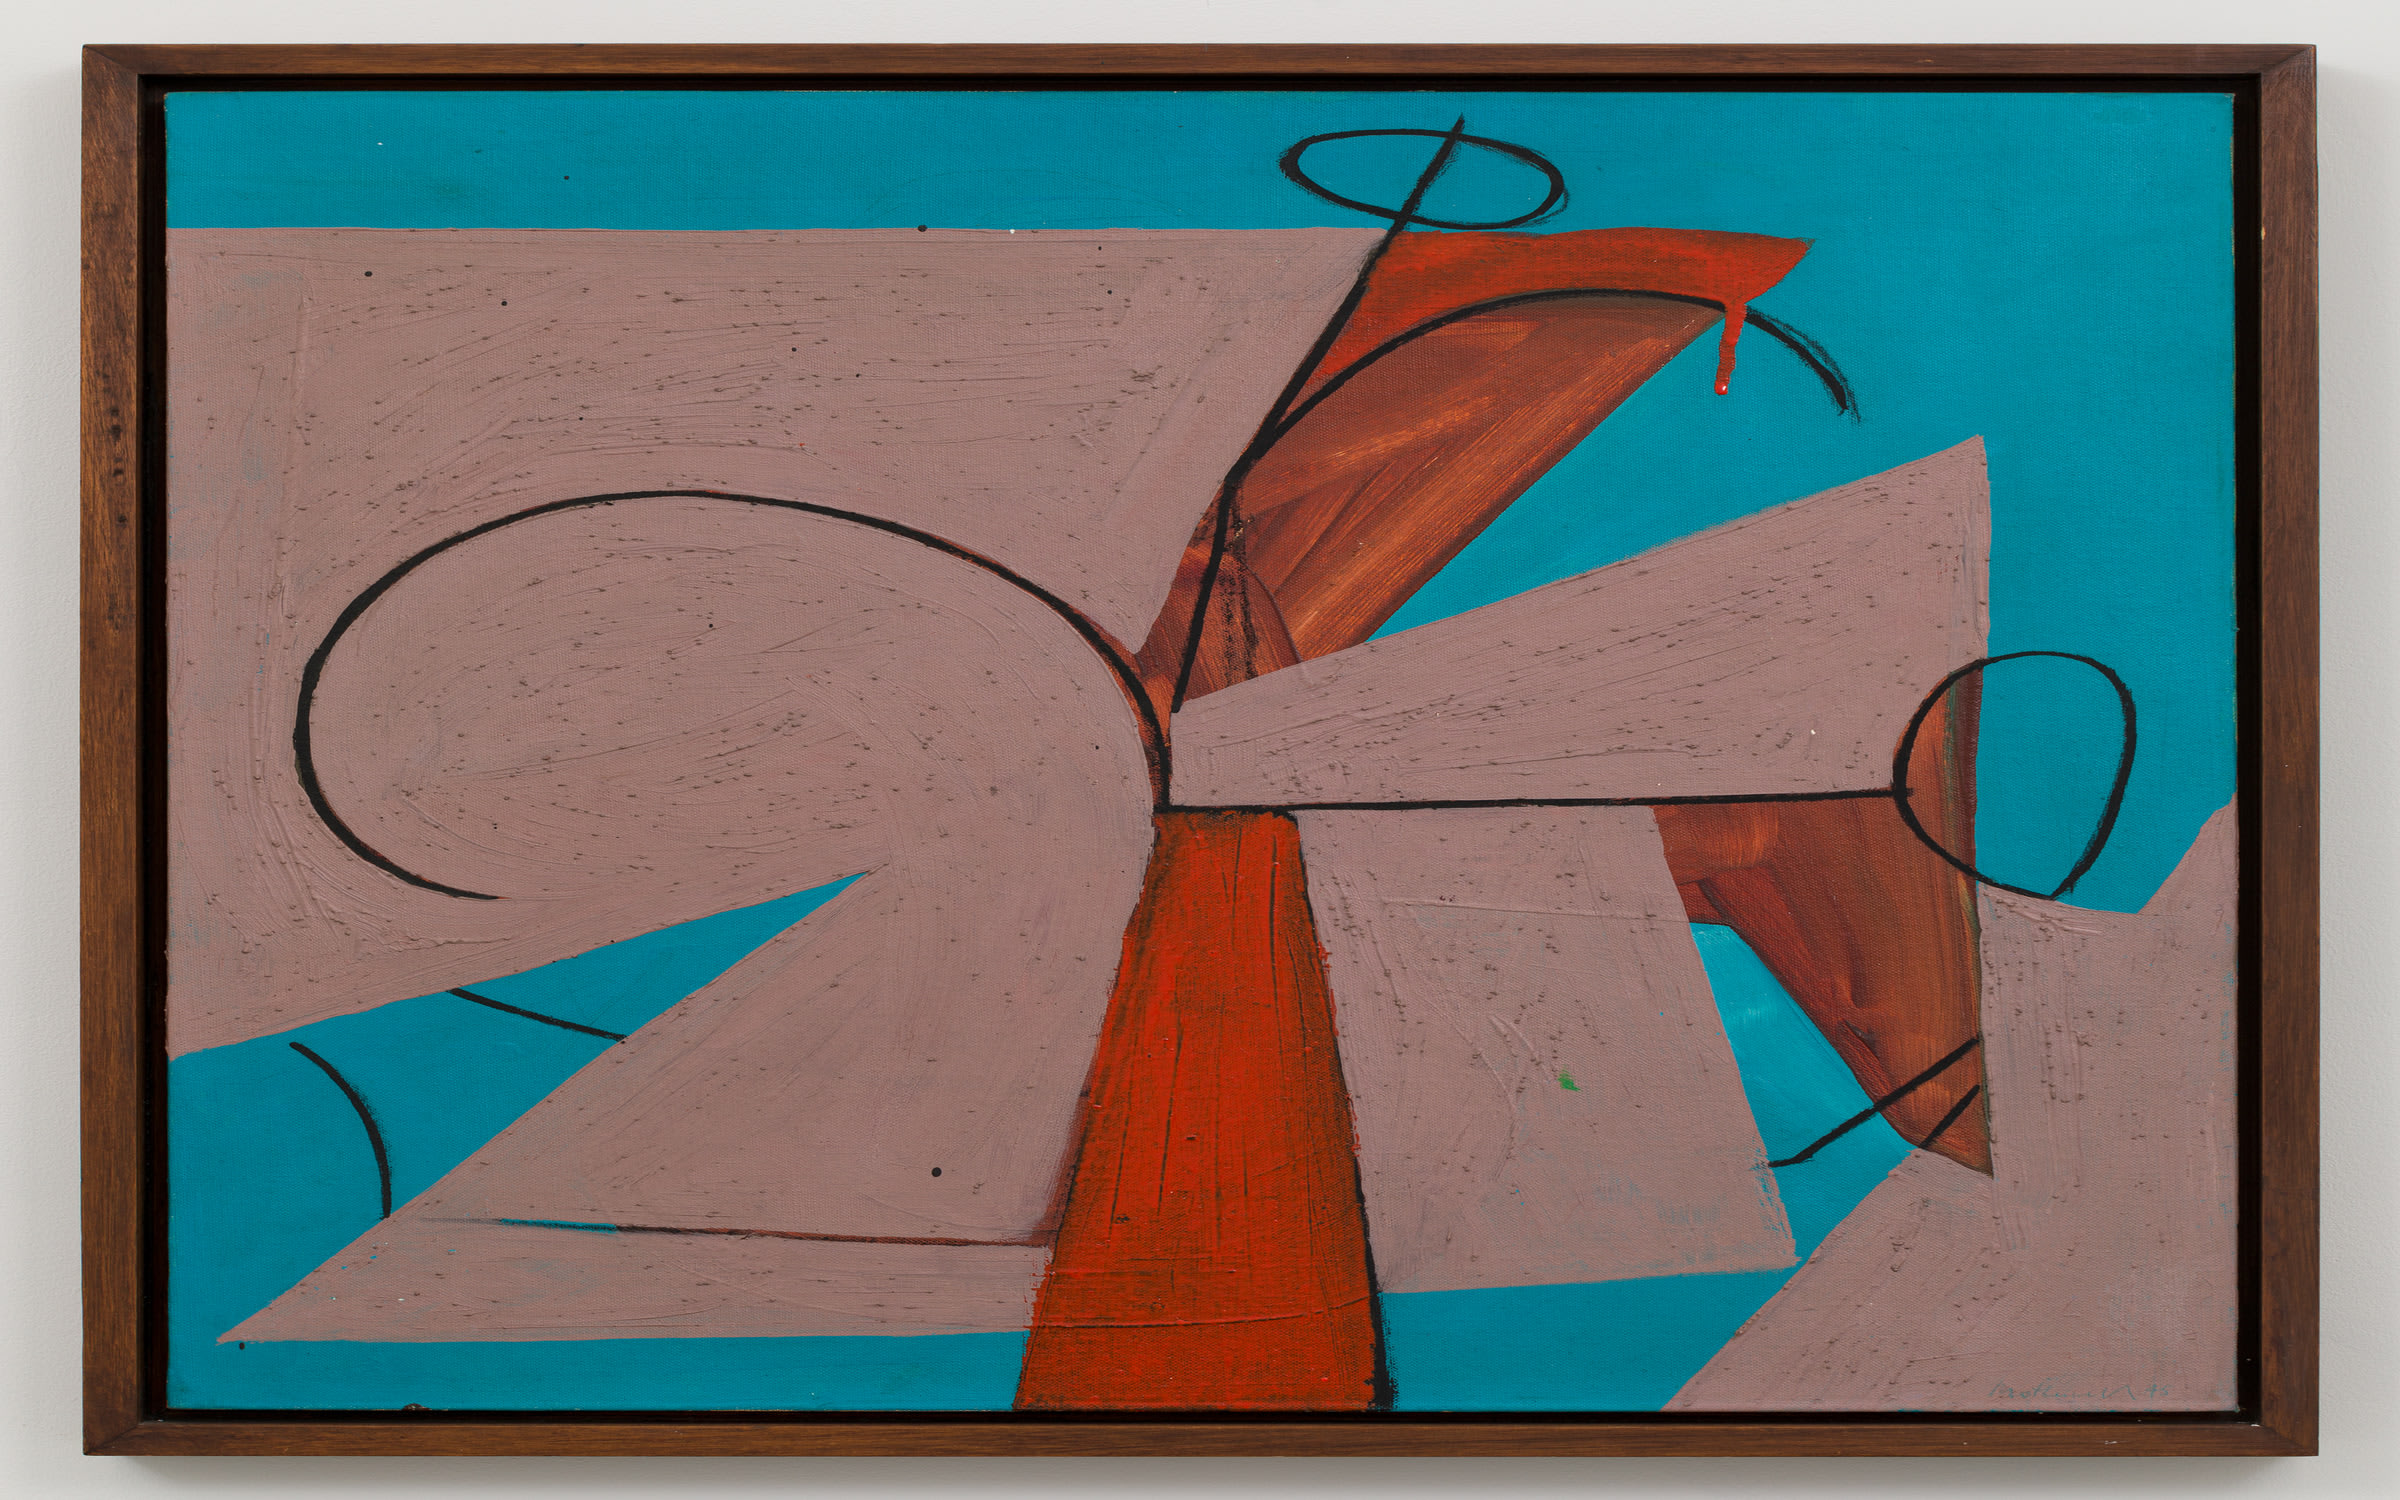 Robert Motherwell, Abstraction on Turquoise, 1945. Courtesy of the artist's estate and Kasmin. 